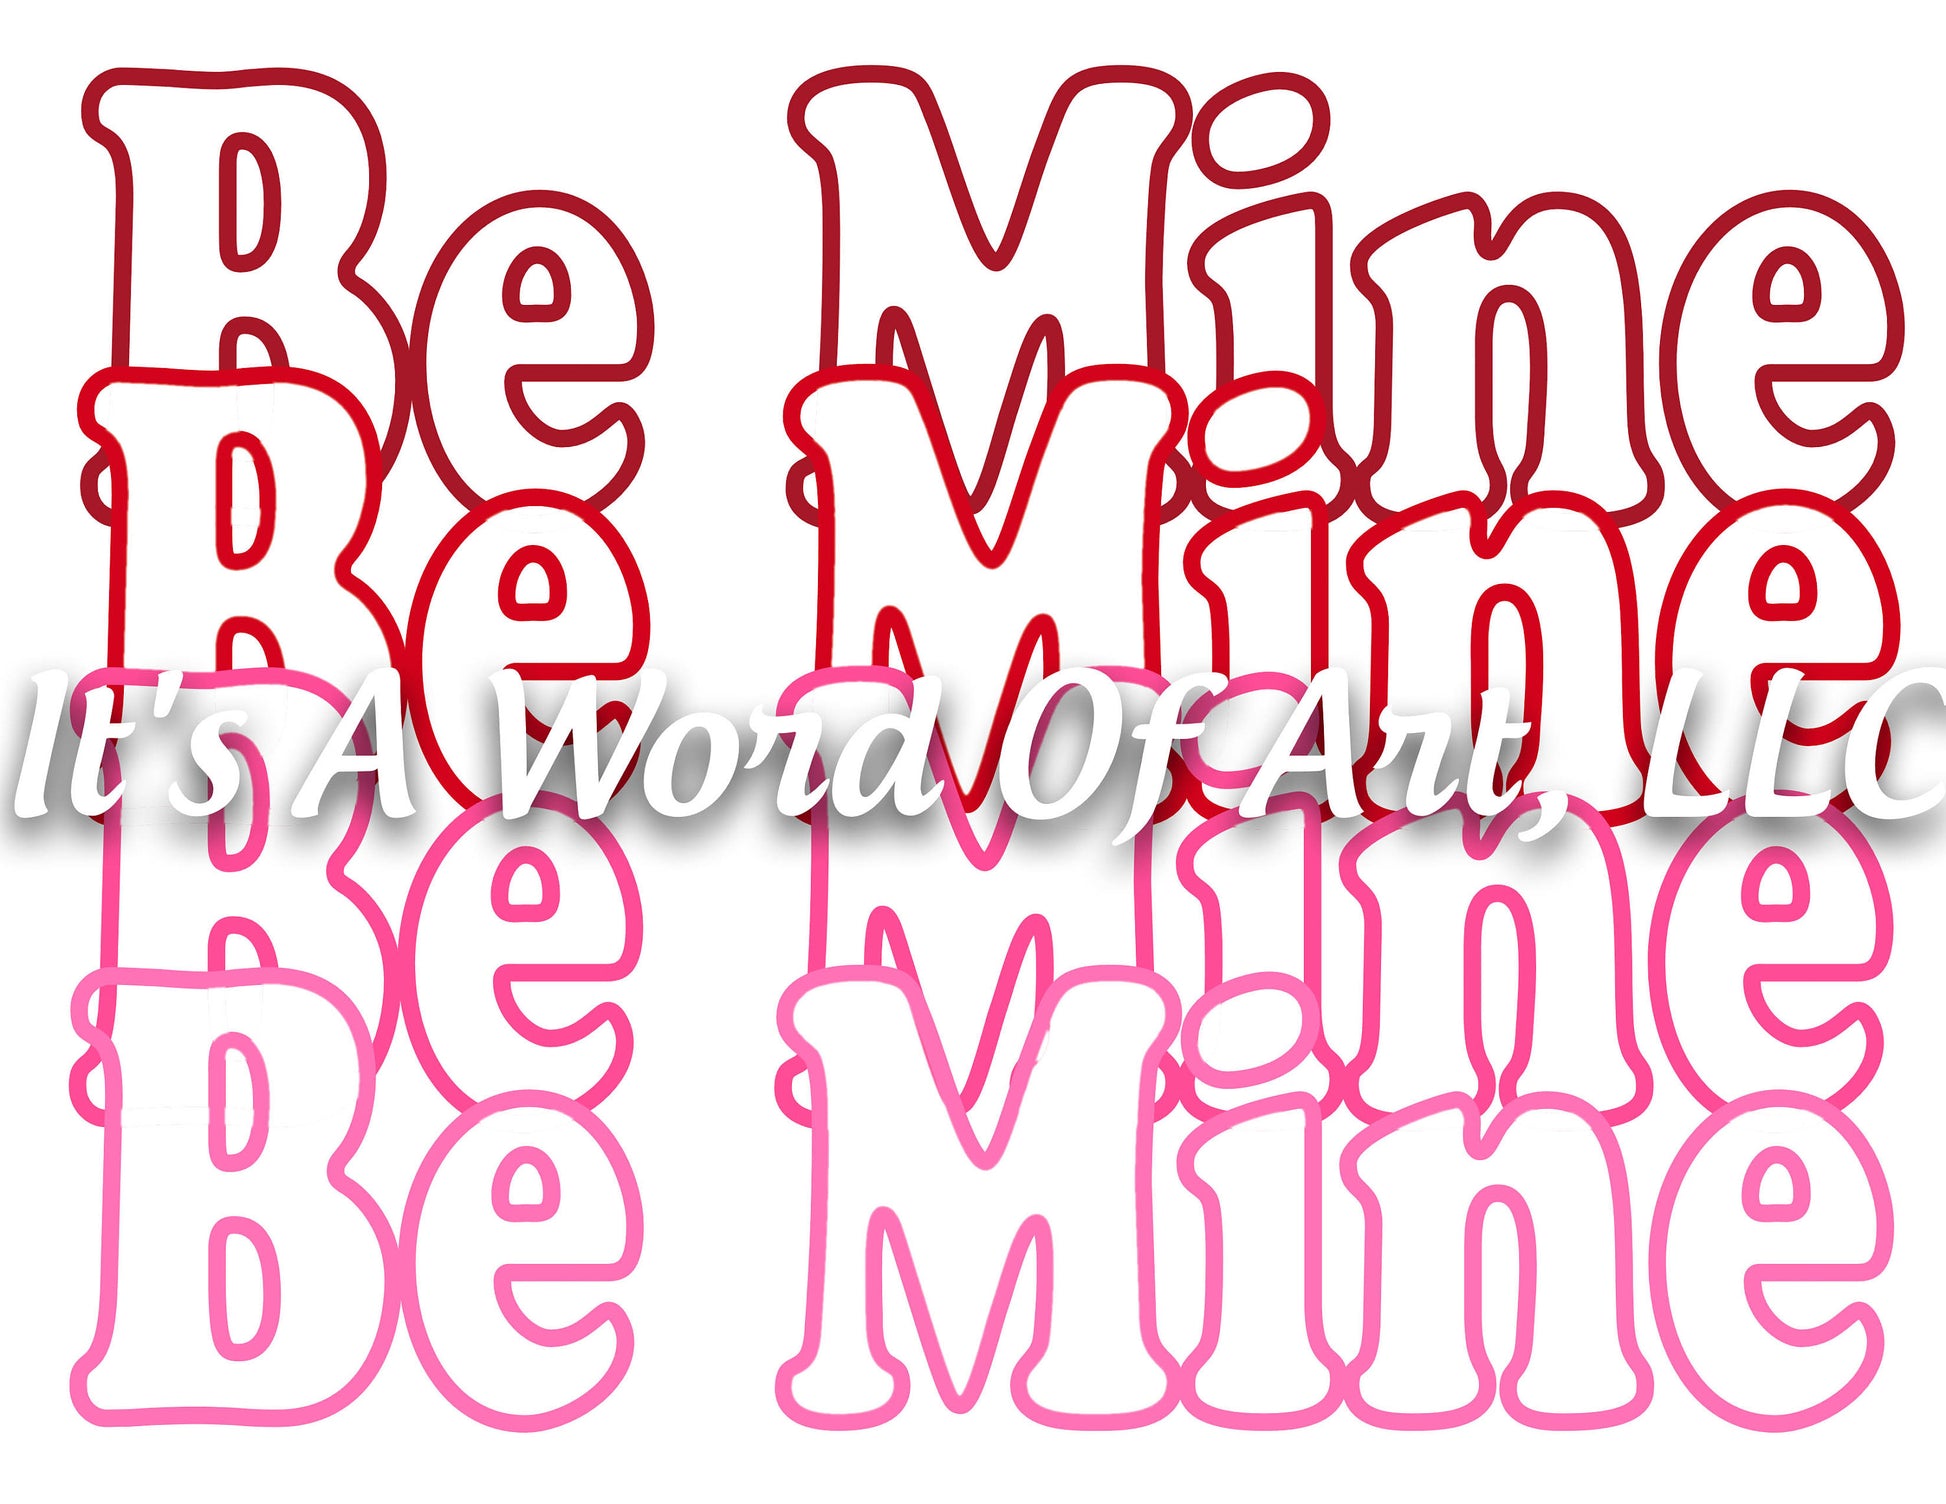 Valentines Day 68 - Be Mine Be Mine Be Mine Repeated - Sublimation Transfer Set/Ready To Press Sublimation Transfer/Sublimation Transfer